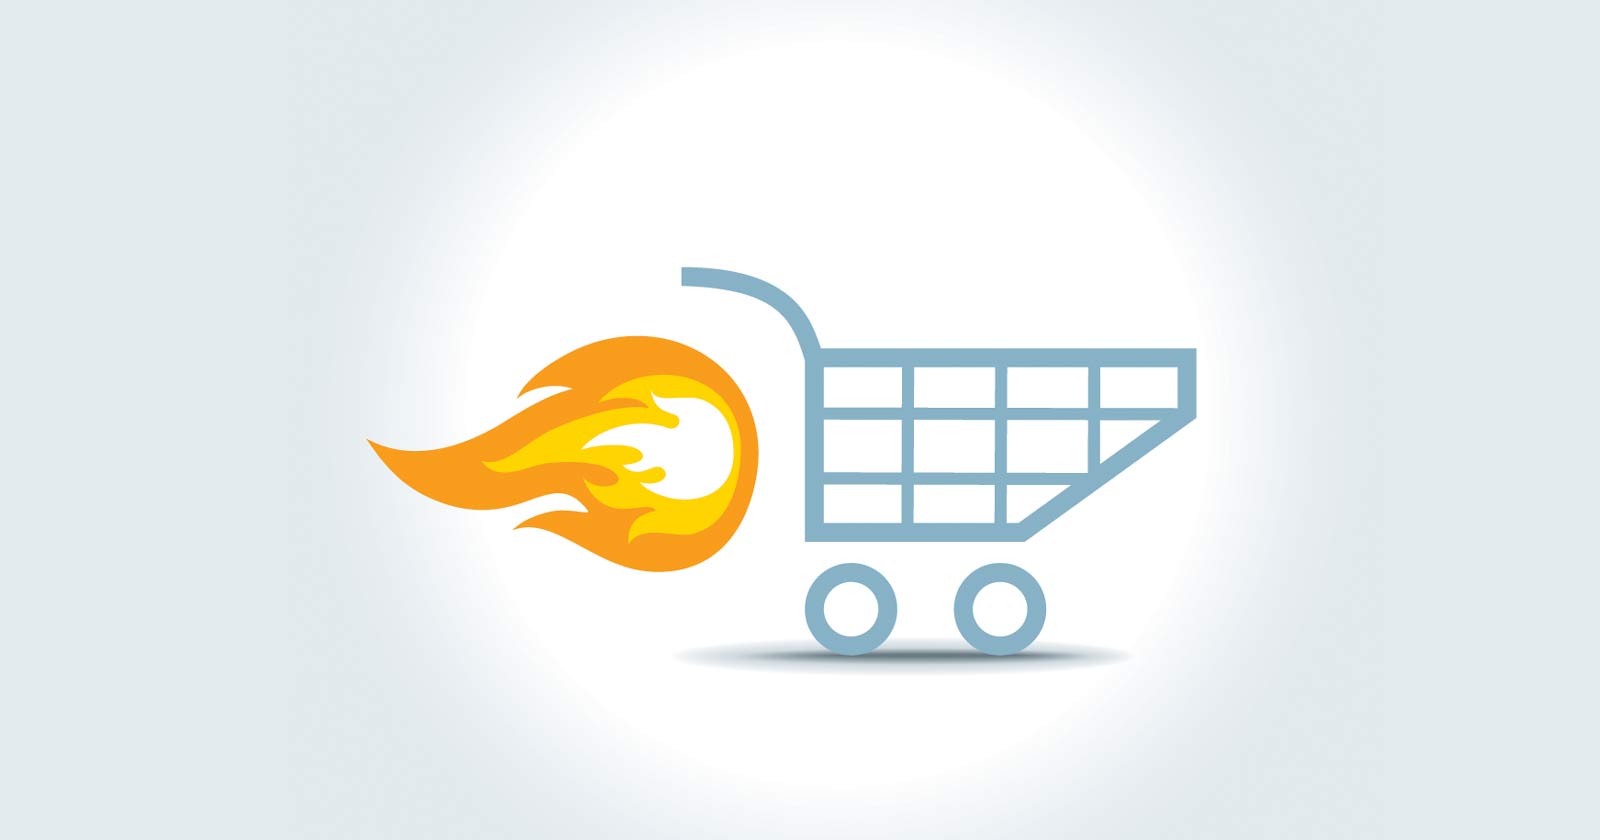 Image of a shopping cart with jet flames emitting from behind it